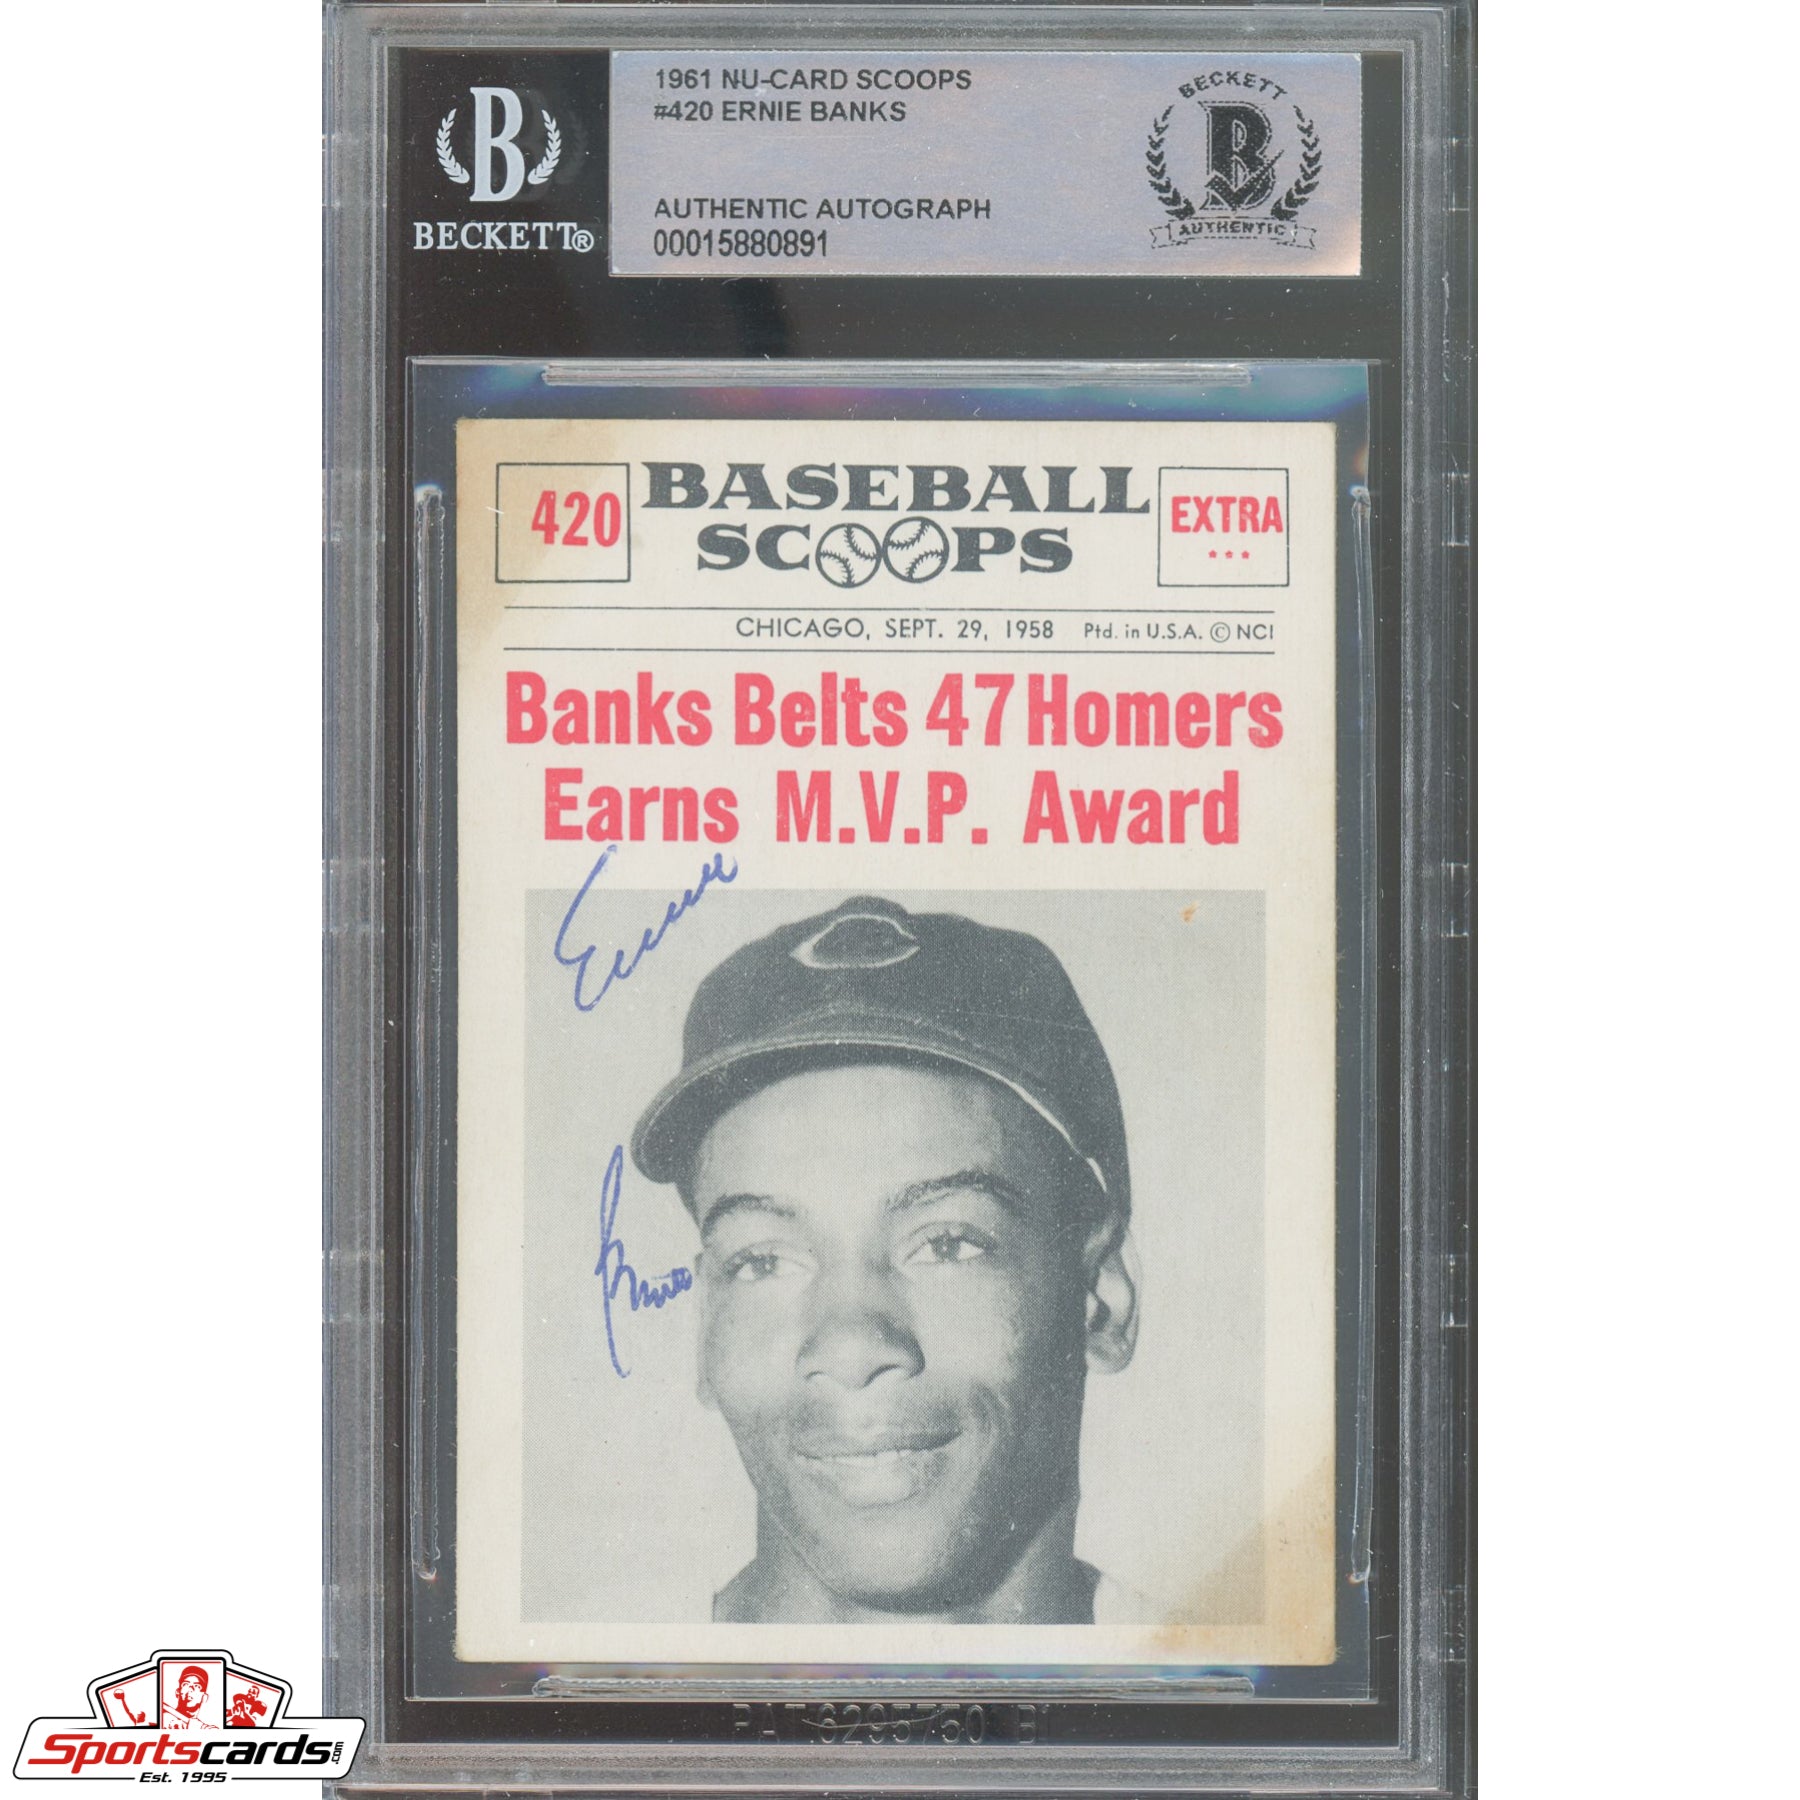 1961 Nu-Card Scoops #420 Ernie Banks Signed Auto Beckett BAS Cubs